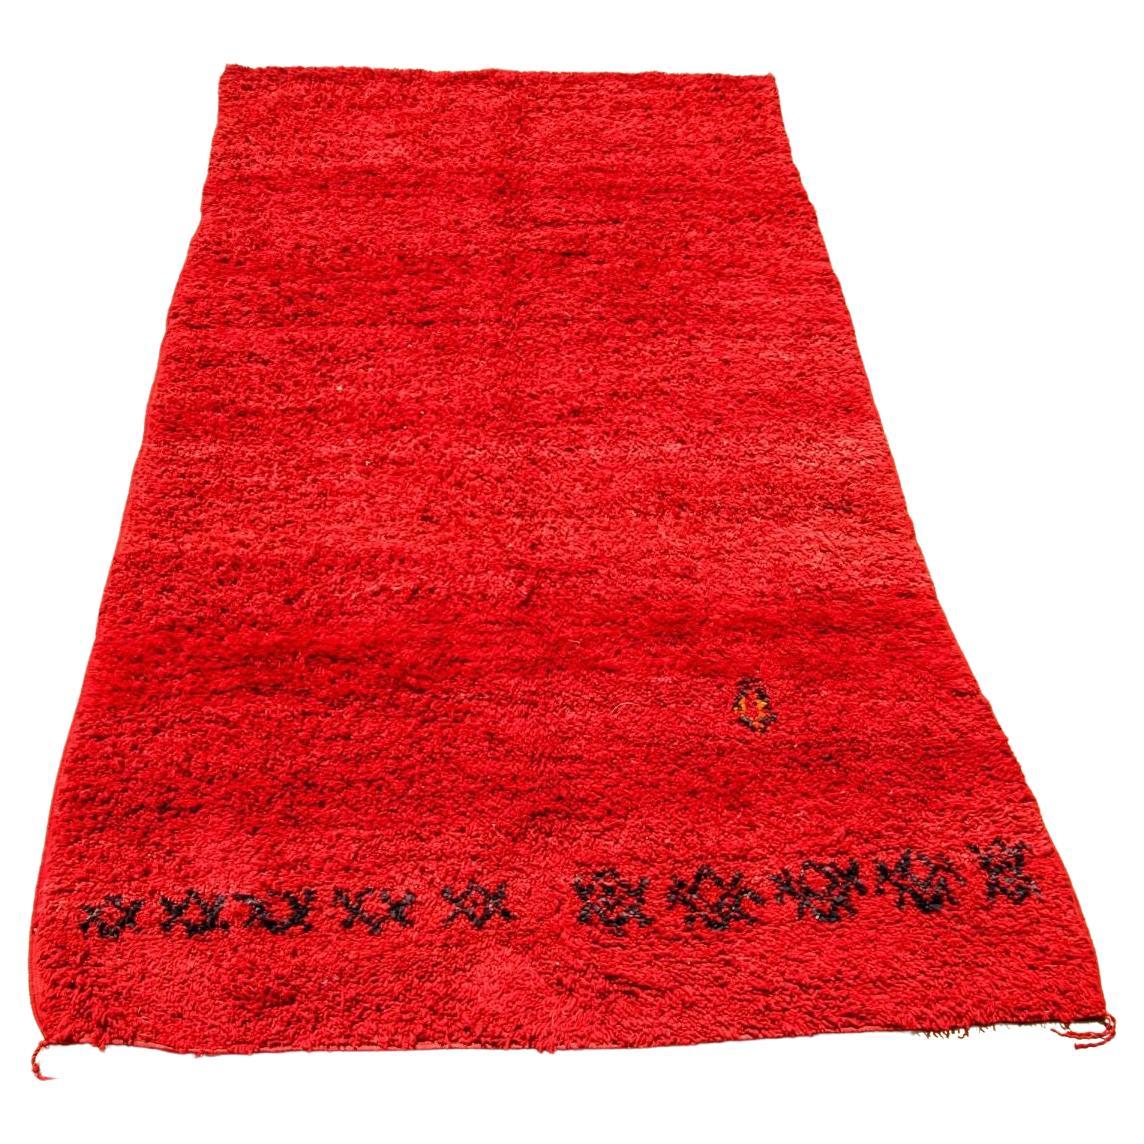 1960s Vintage Red Ethnic Moroccan Fluffy Rug Bed of Roses